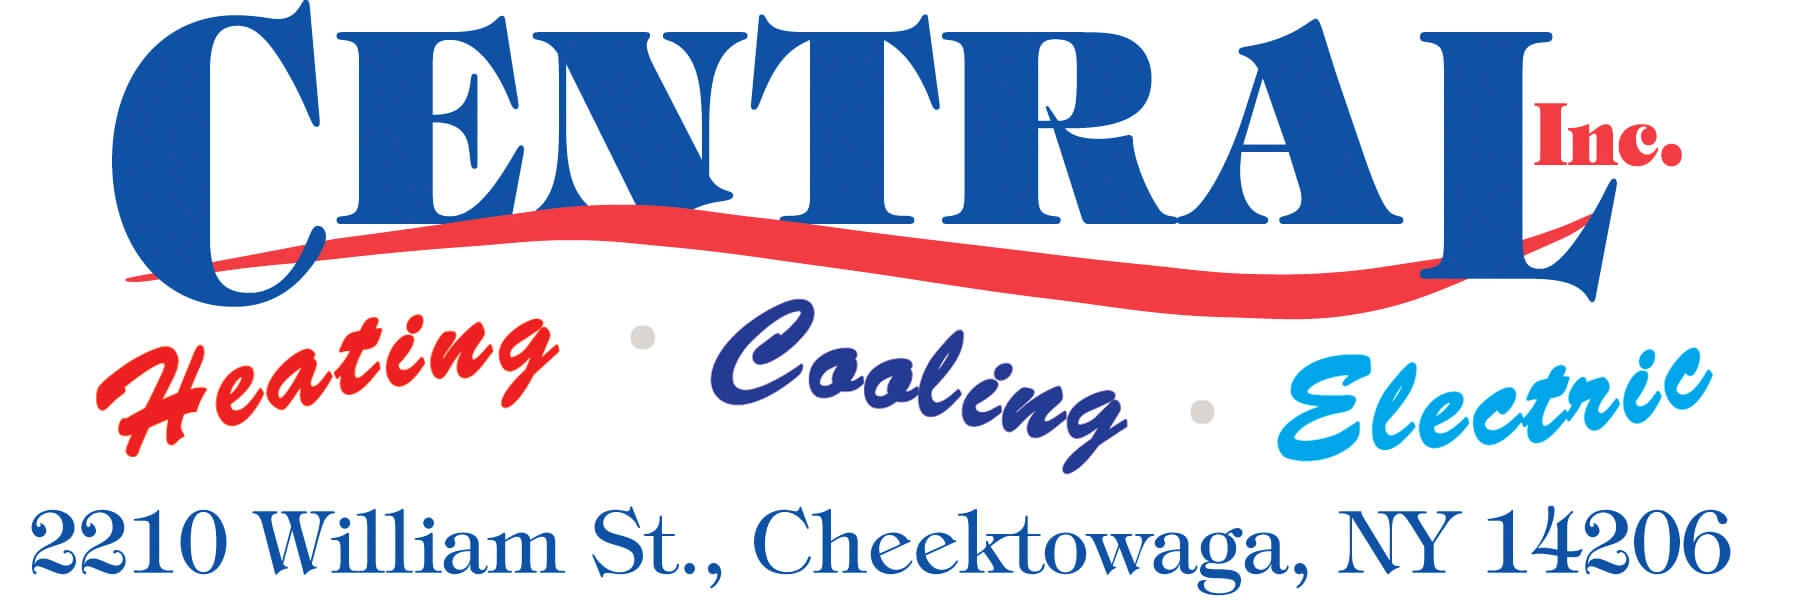 Central Heating & Cooling, Inc. Logo